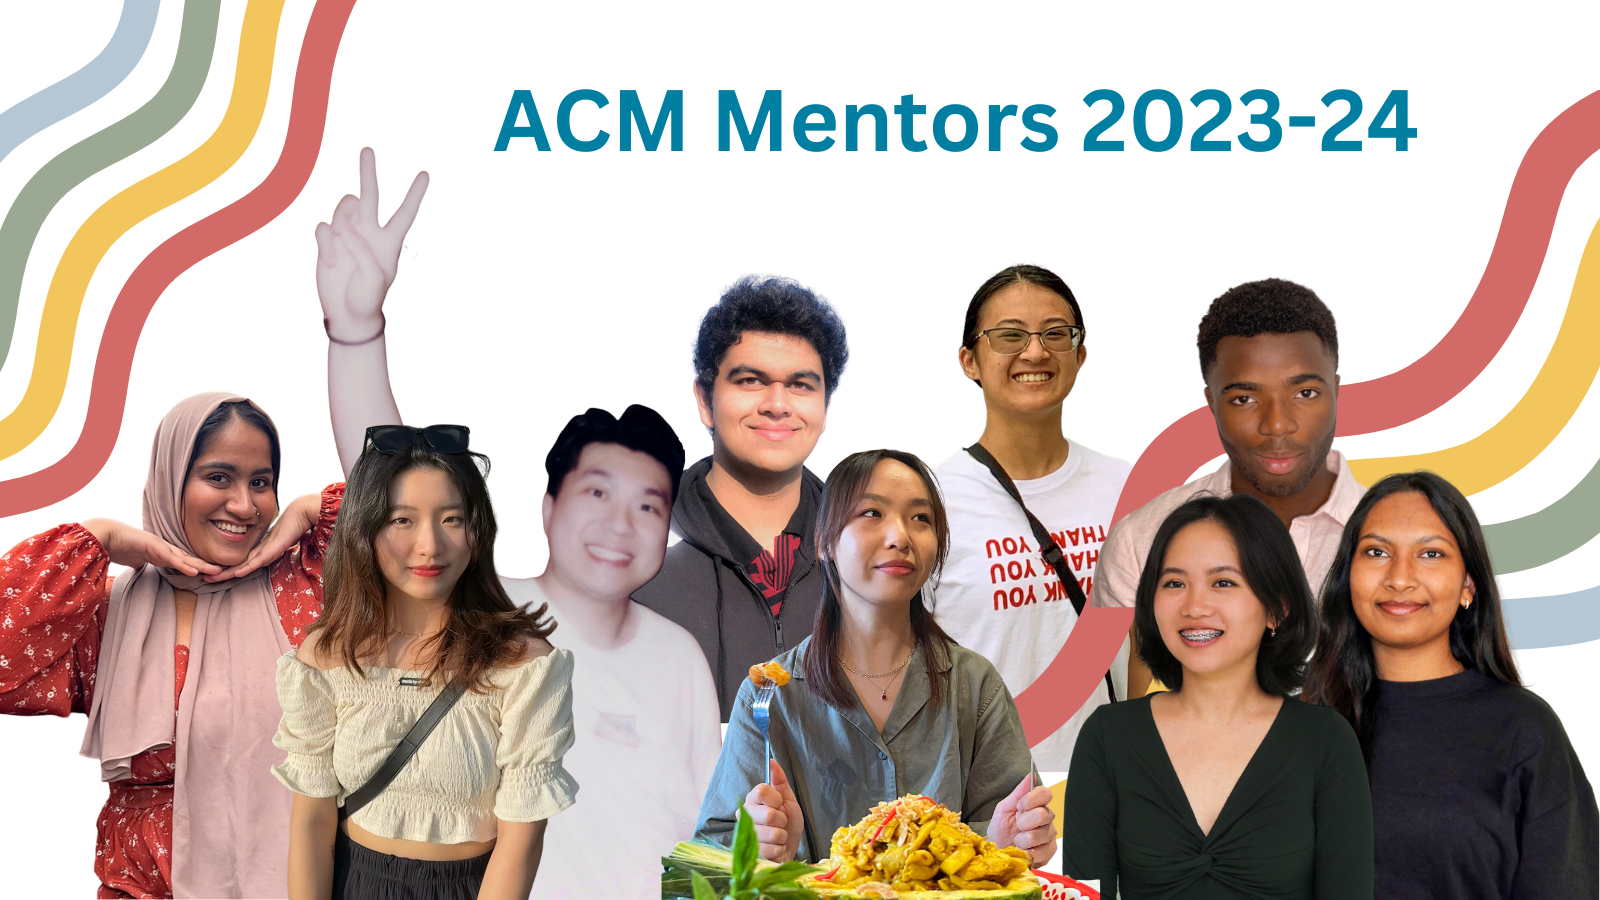 collage of the acm mentors headshot put together with rainbows in the background